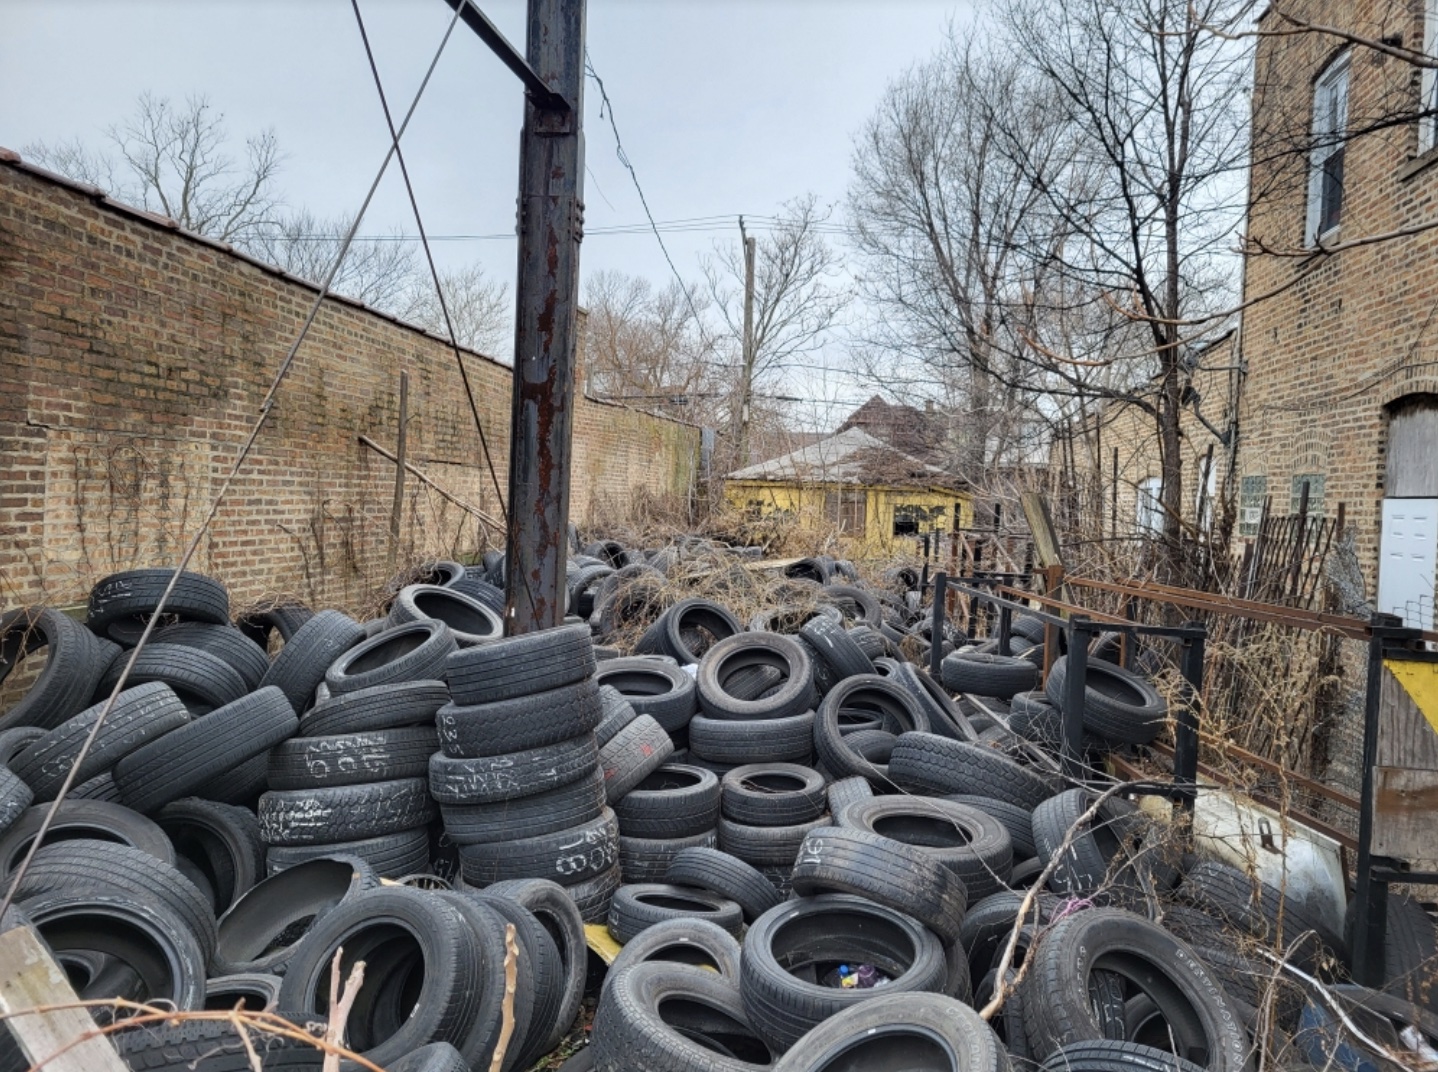 The city of Chicago is suing a Northbrook resident and one of her real estate companies for more than $10 million, alleging they failed for years to clean up a hazardous old tire dump in West Englewood. (Credit: City of Chicago legal exhibit)